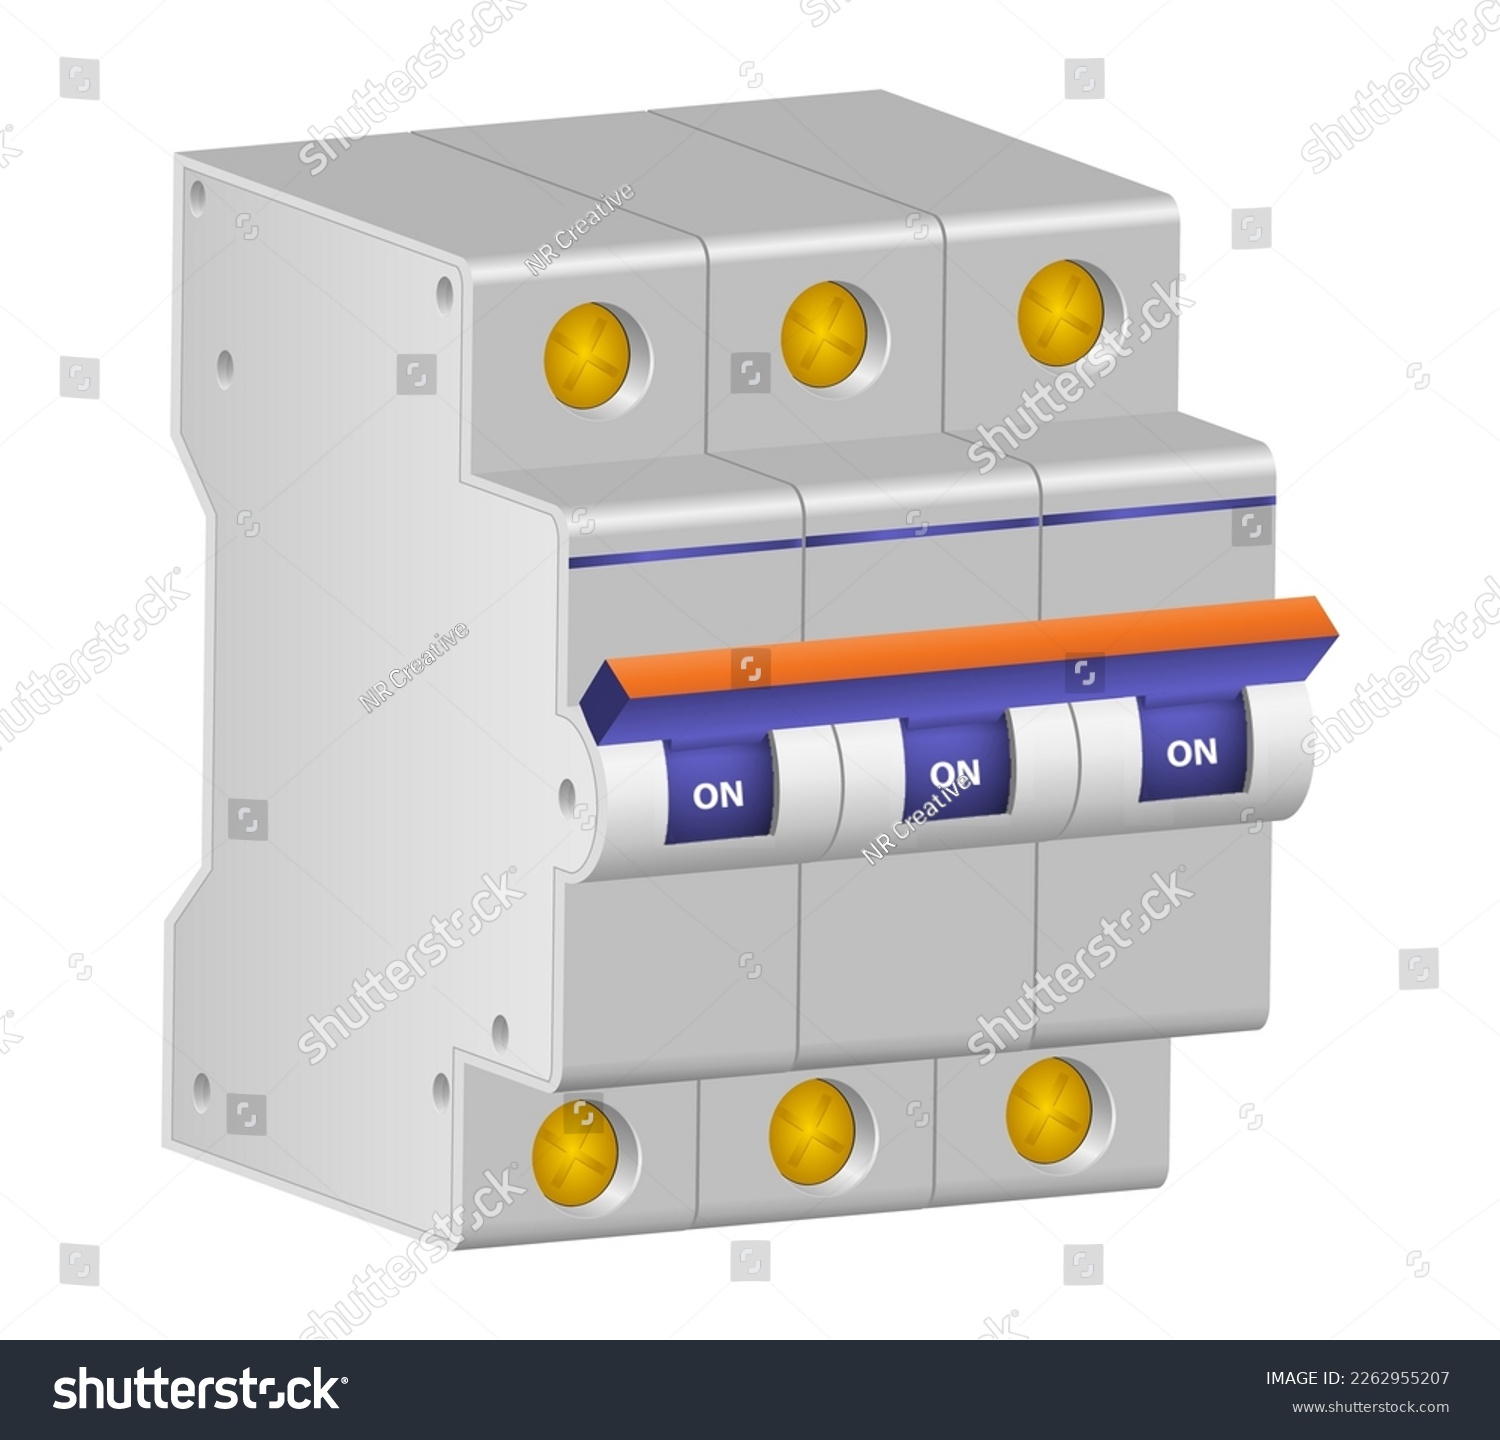 SVG of fuse box electrical switch panel mcb modular isolated - 3d illustration svg